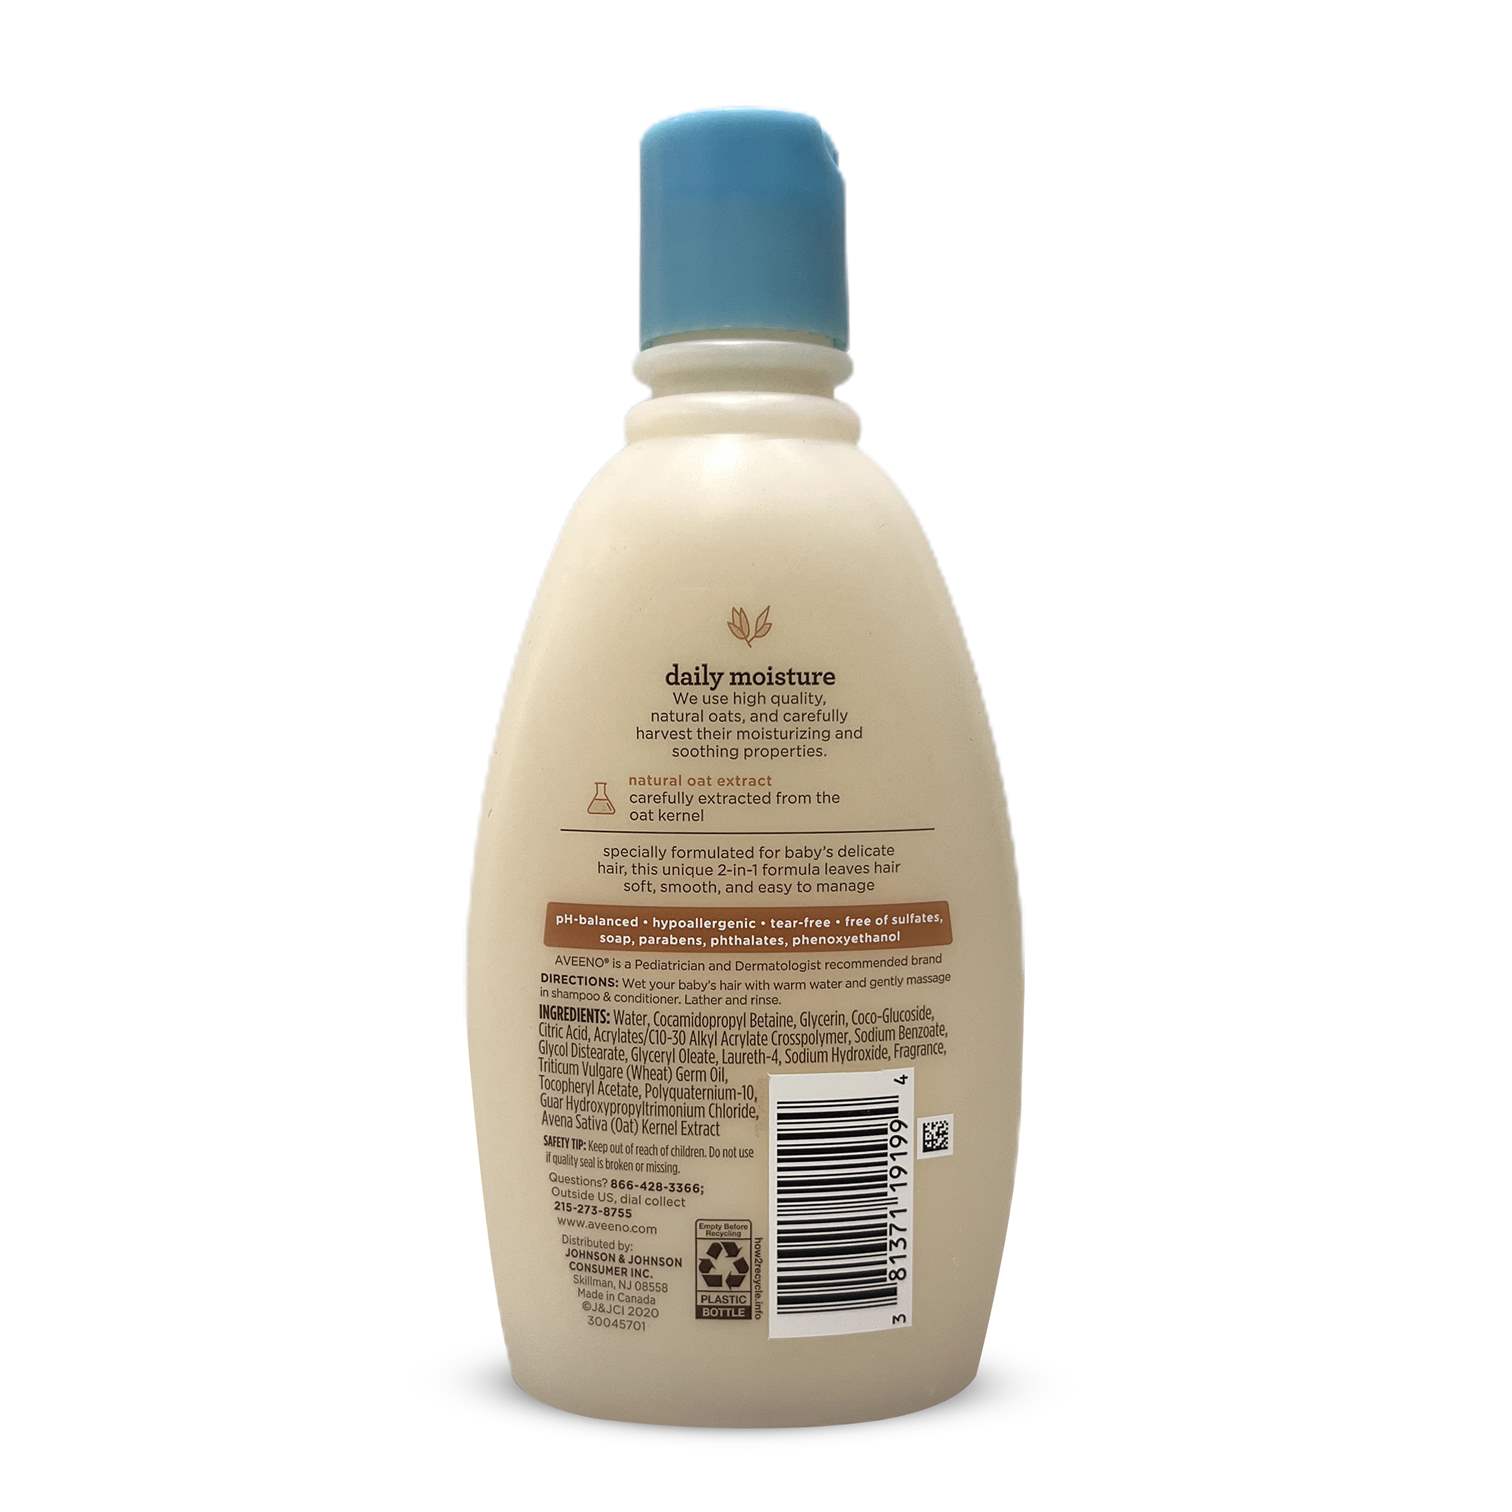 AVEENO BABY Daily moisture 2 in 1 shampoo and conditioner, natural oat extract - 354 ml